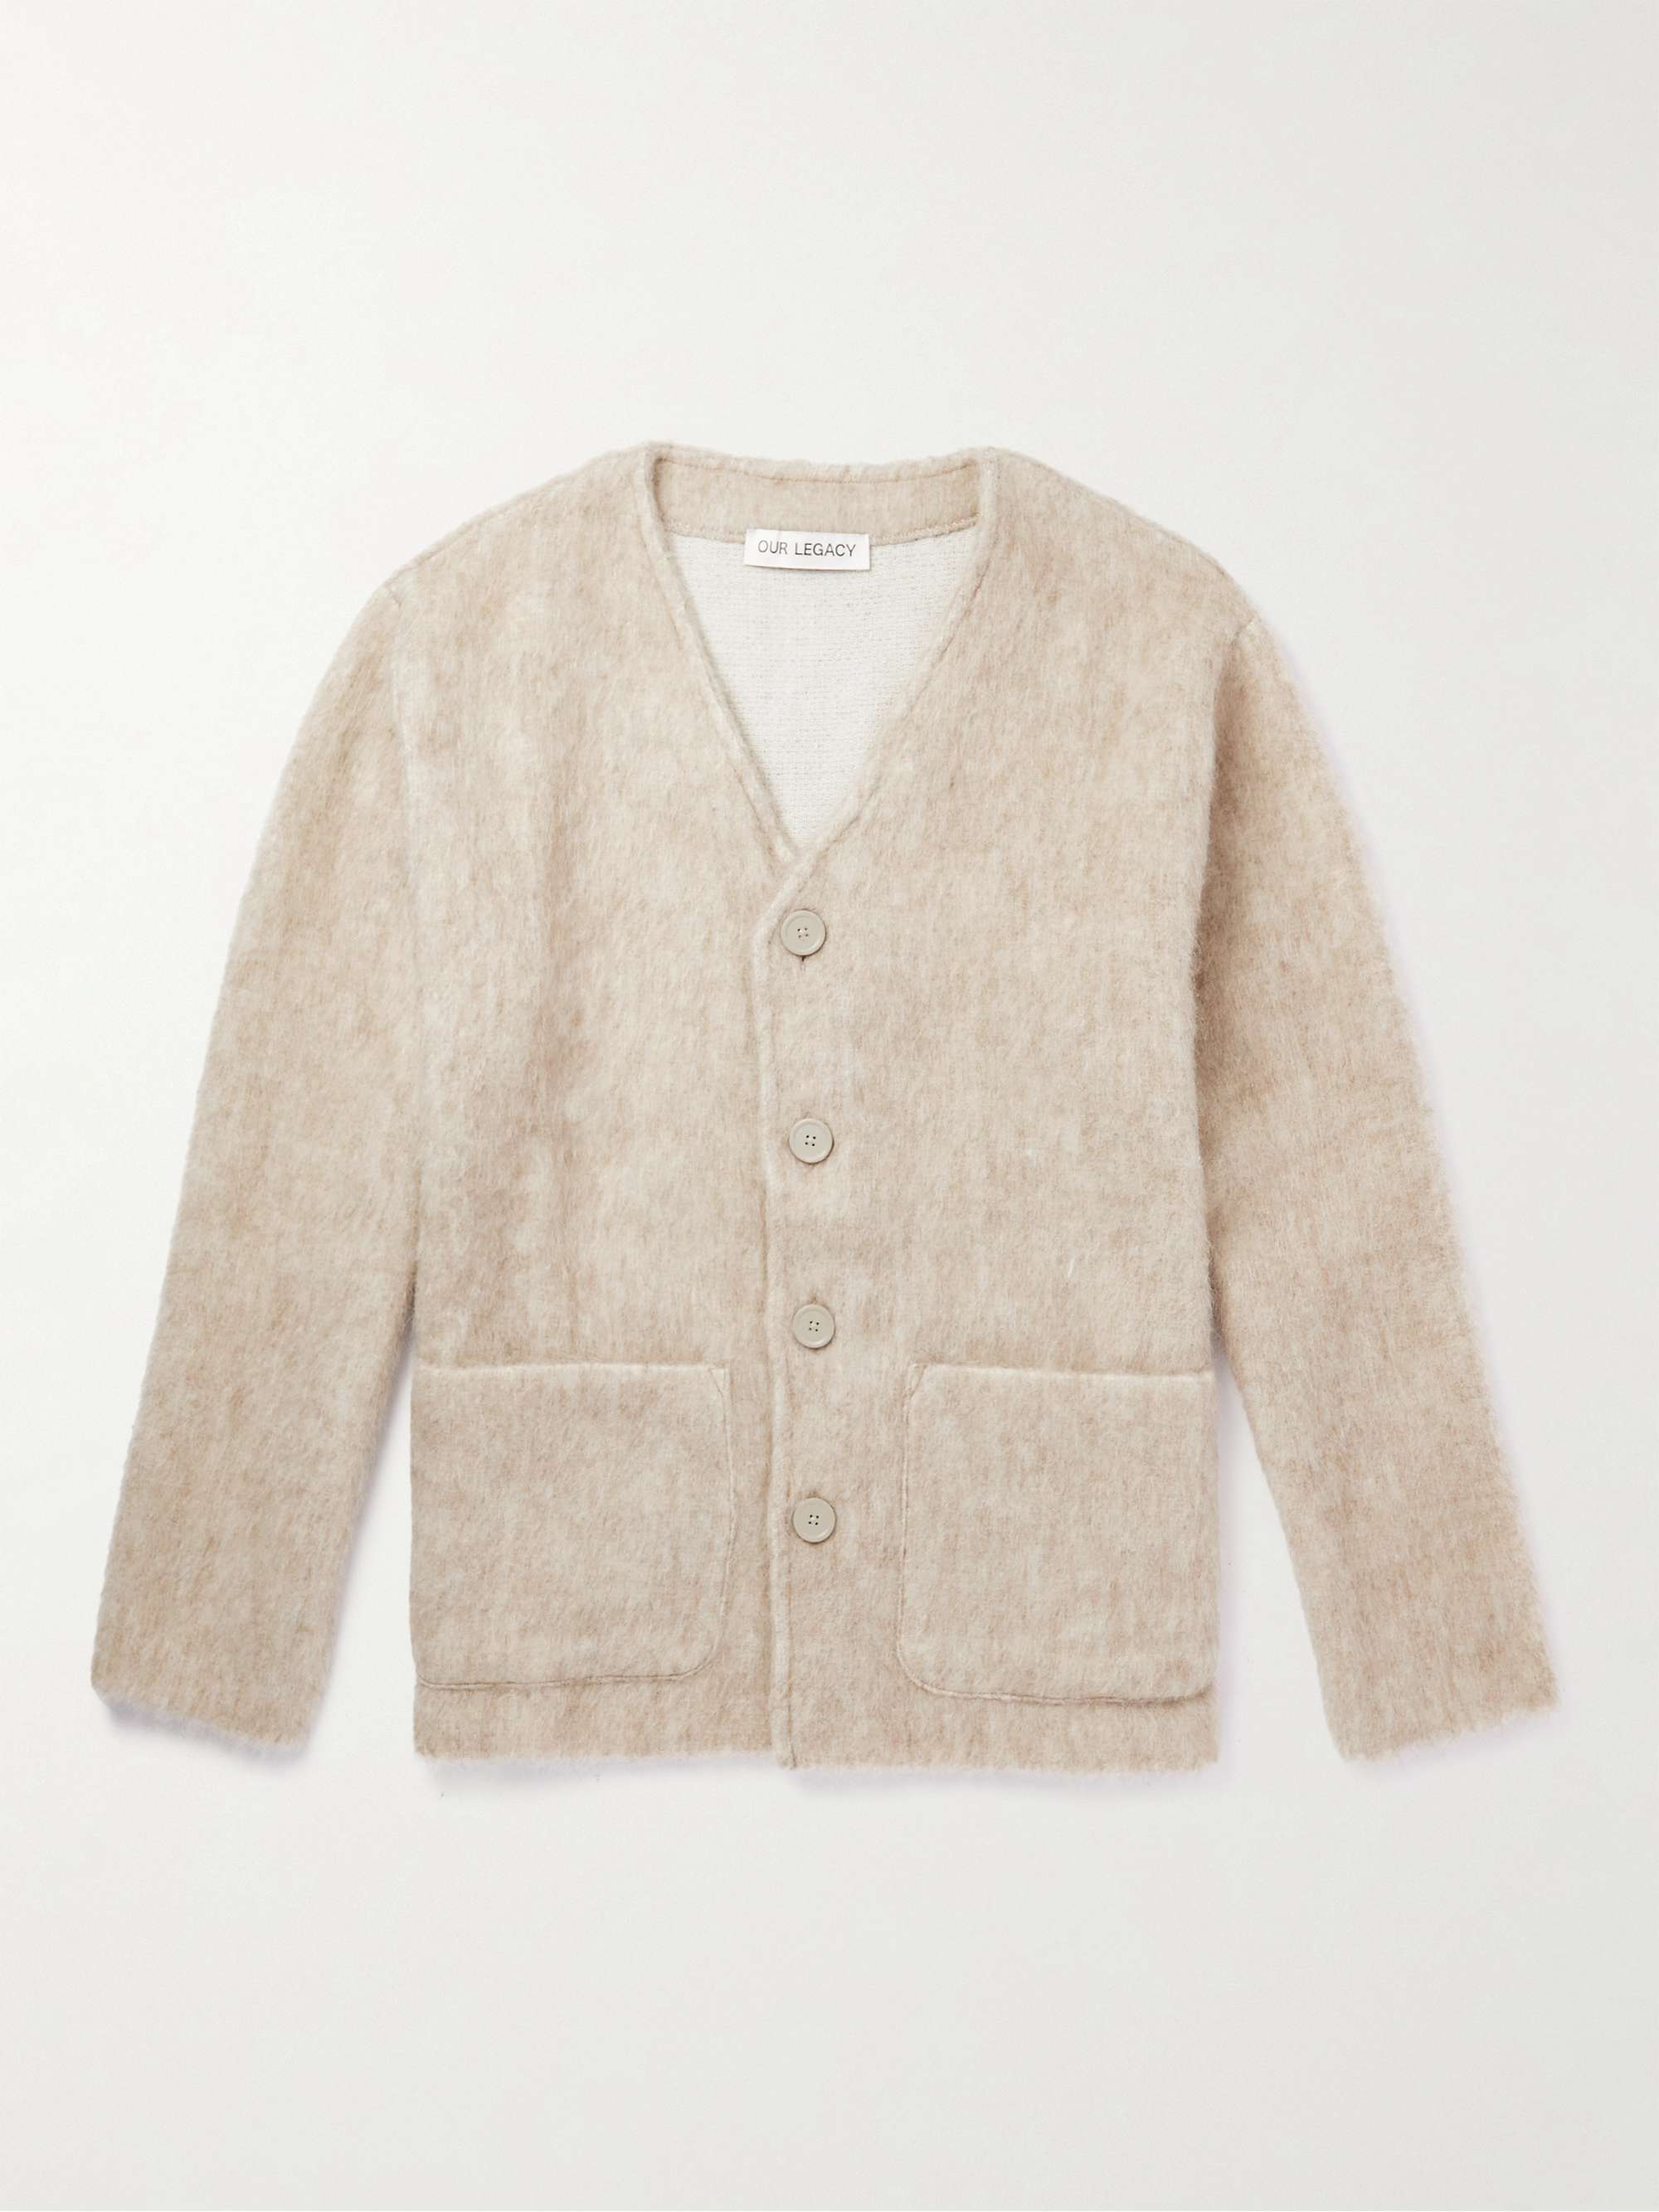 OUR LEGACY Brushed Knitted Cardigan | MR PORTER